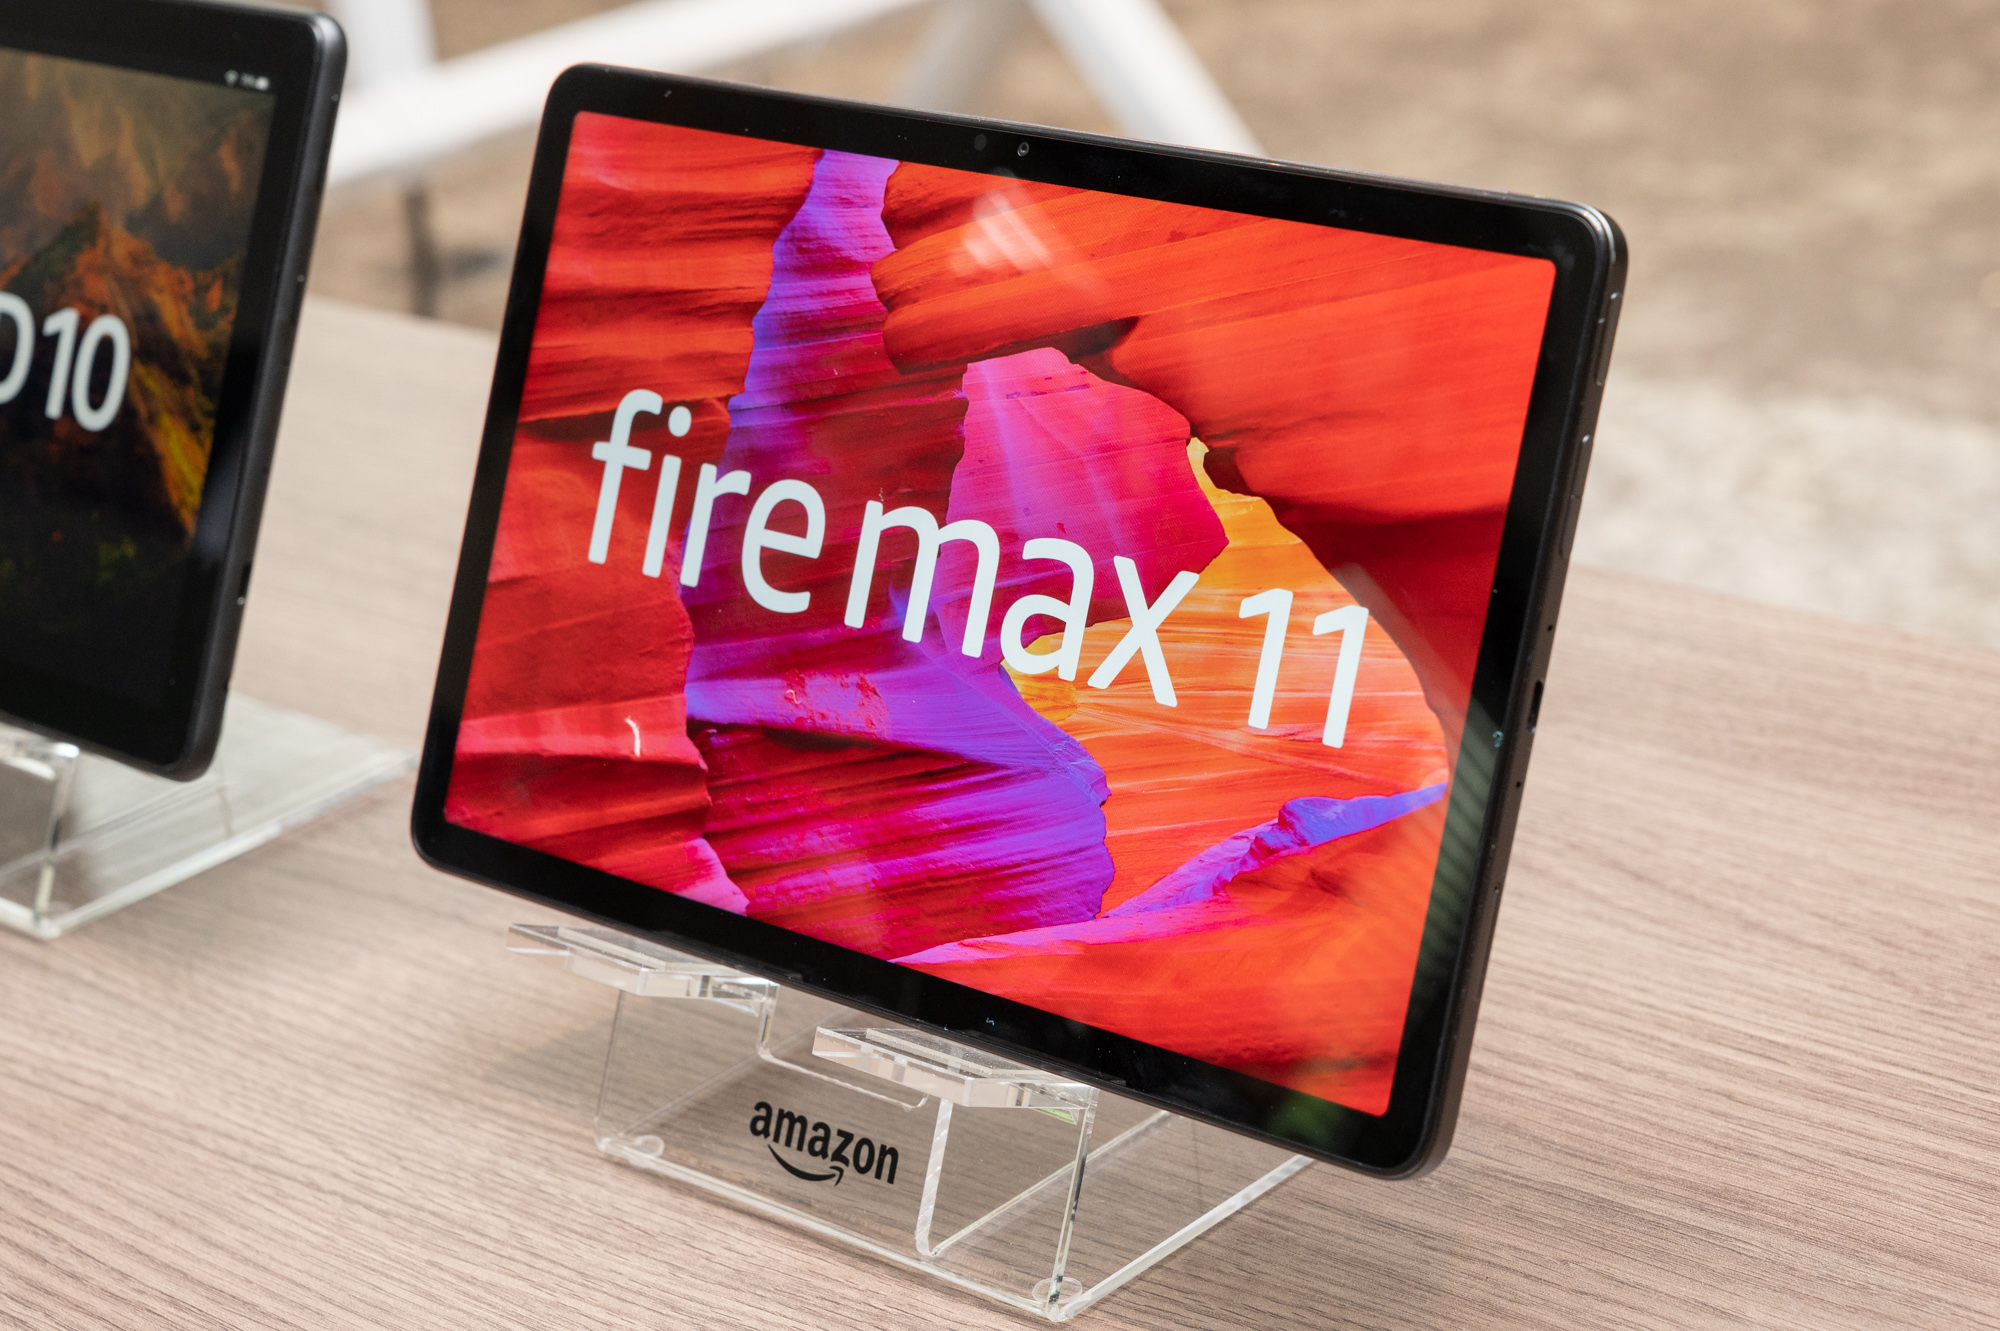 Fire Max 11 タブレット 11インチ 64GB Fire HD